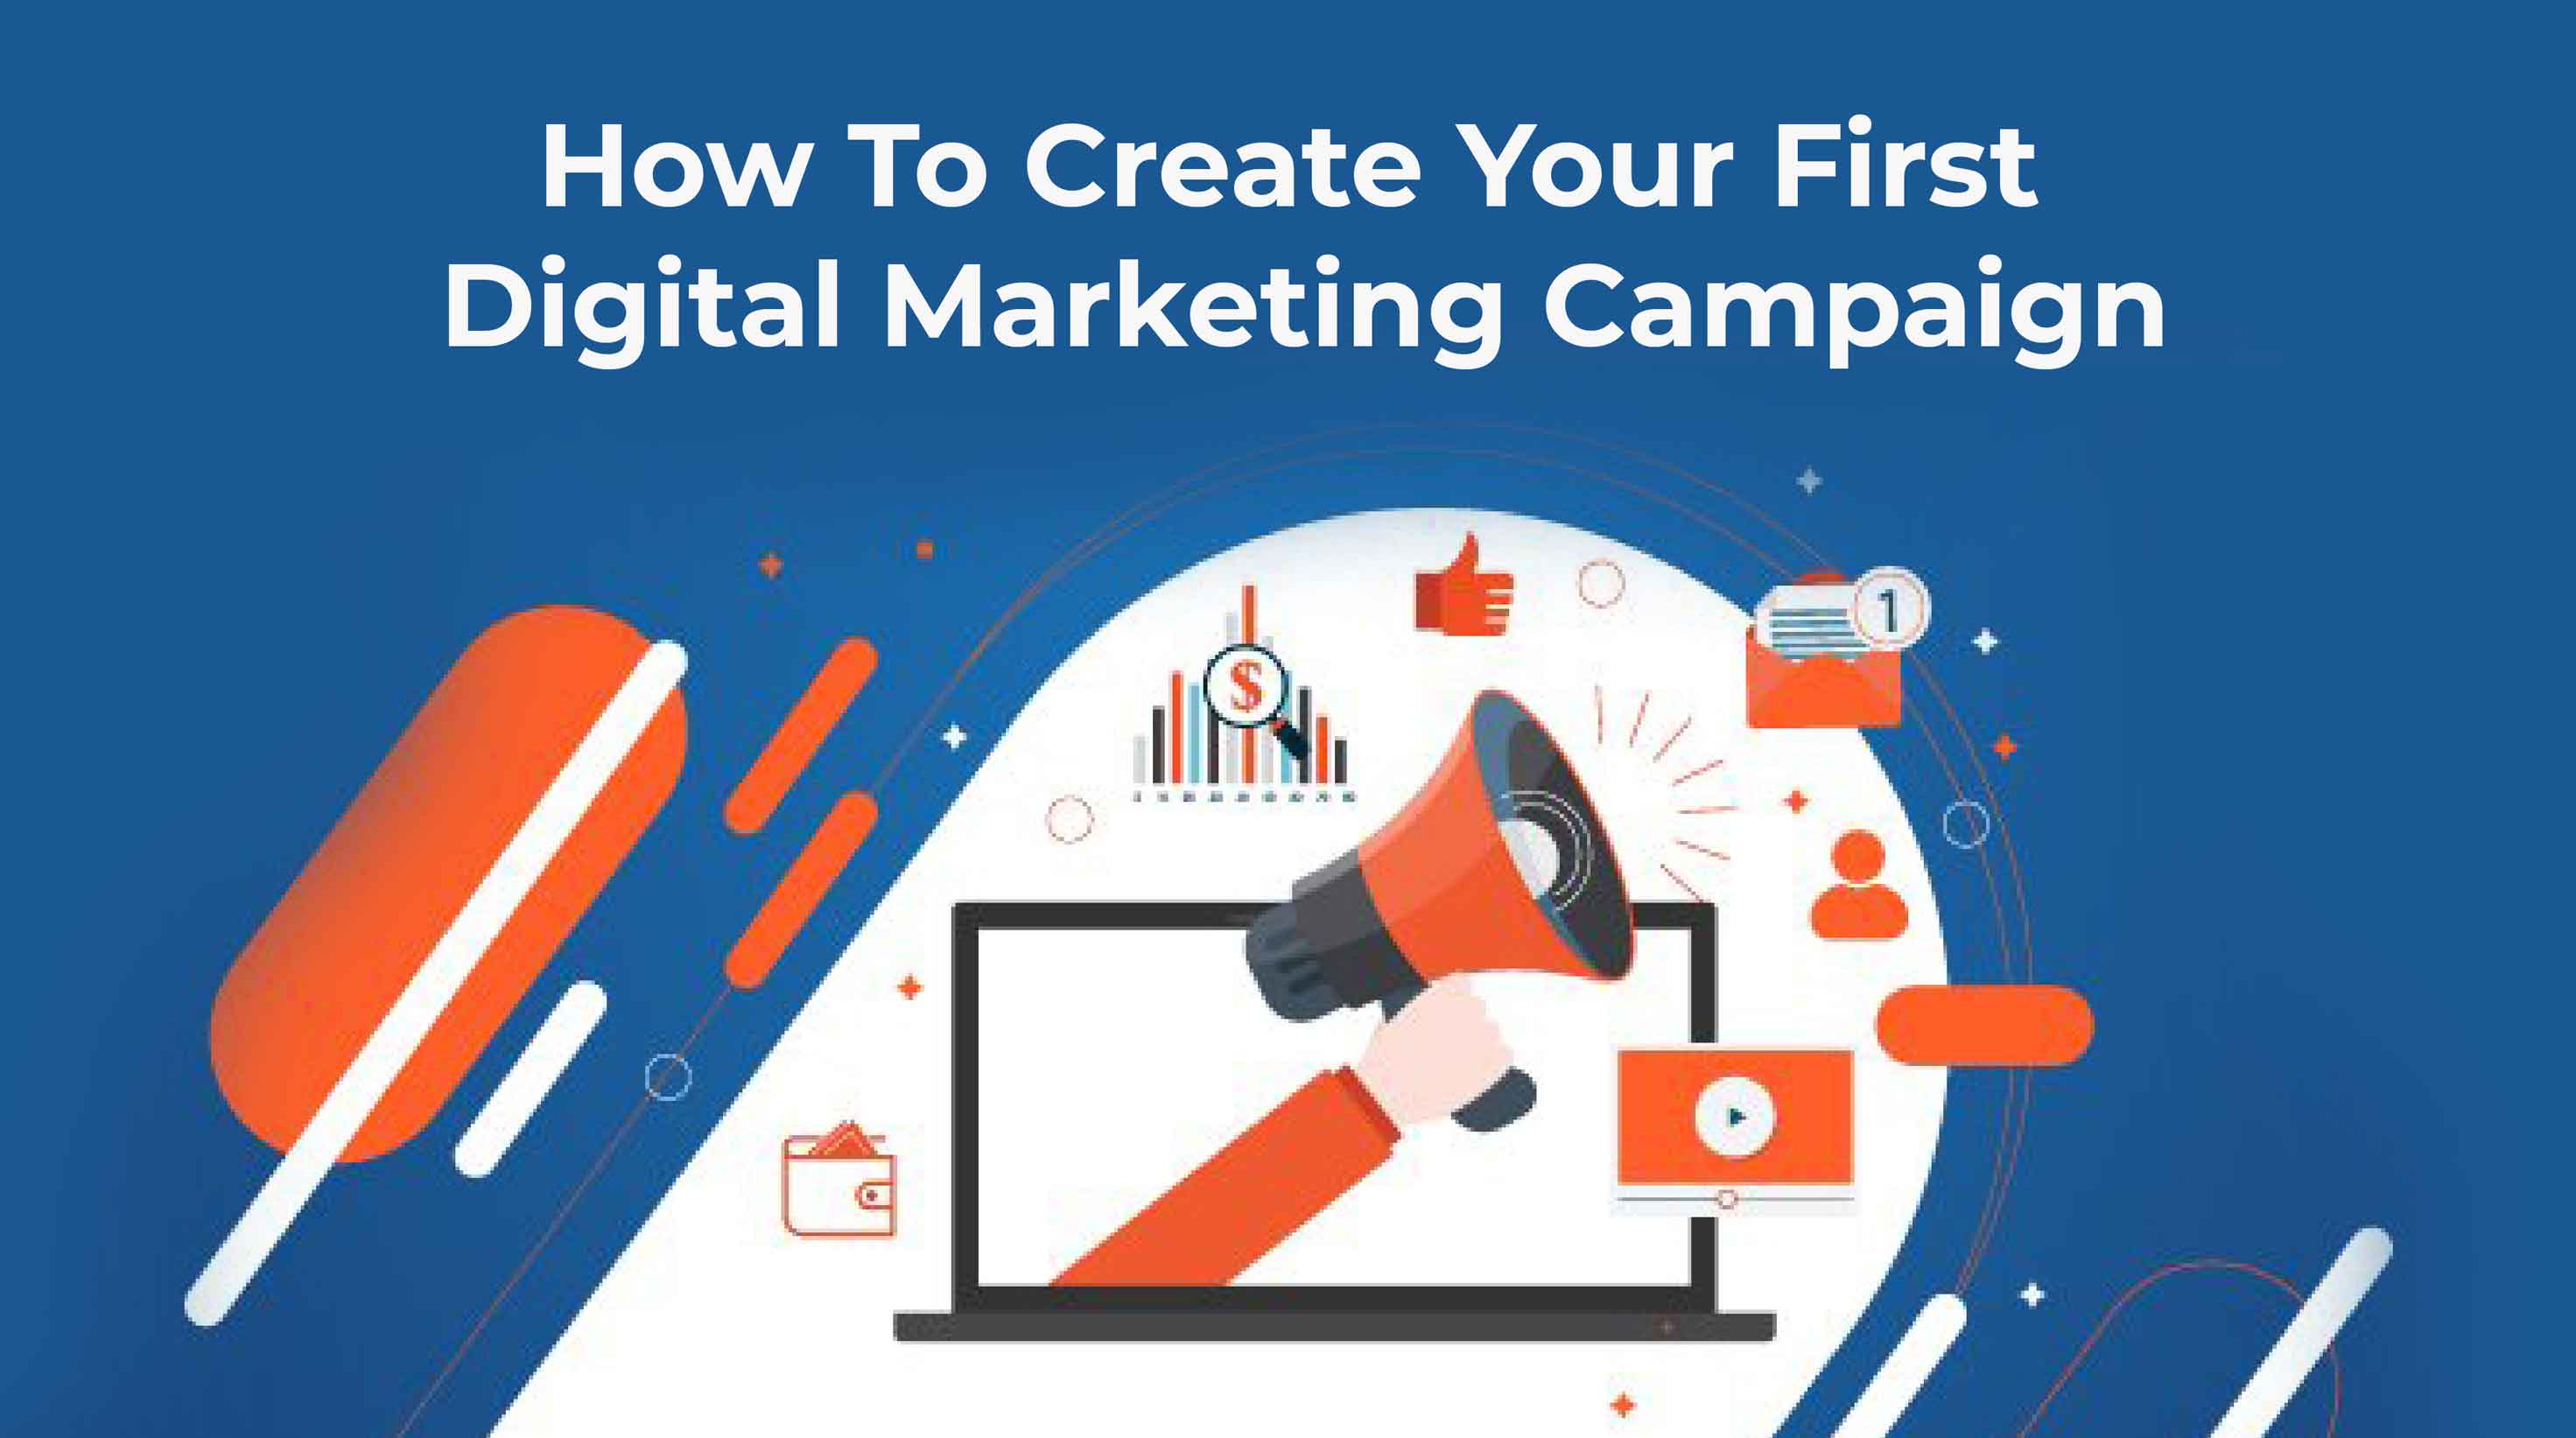 How to create your first digital marketing campaign?